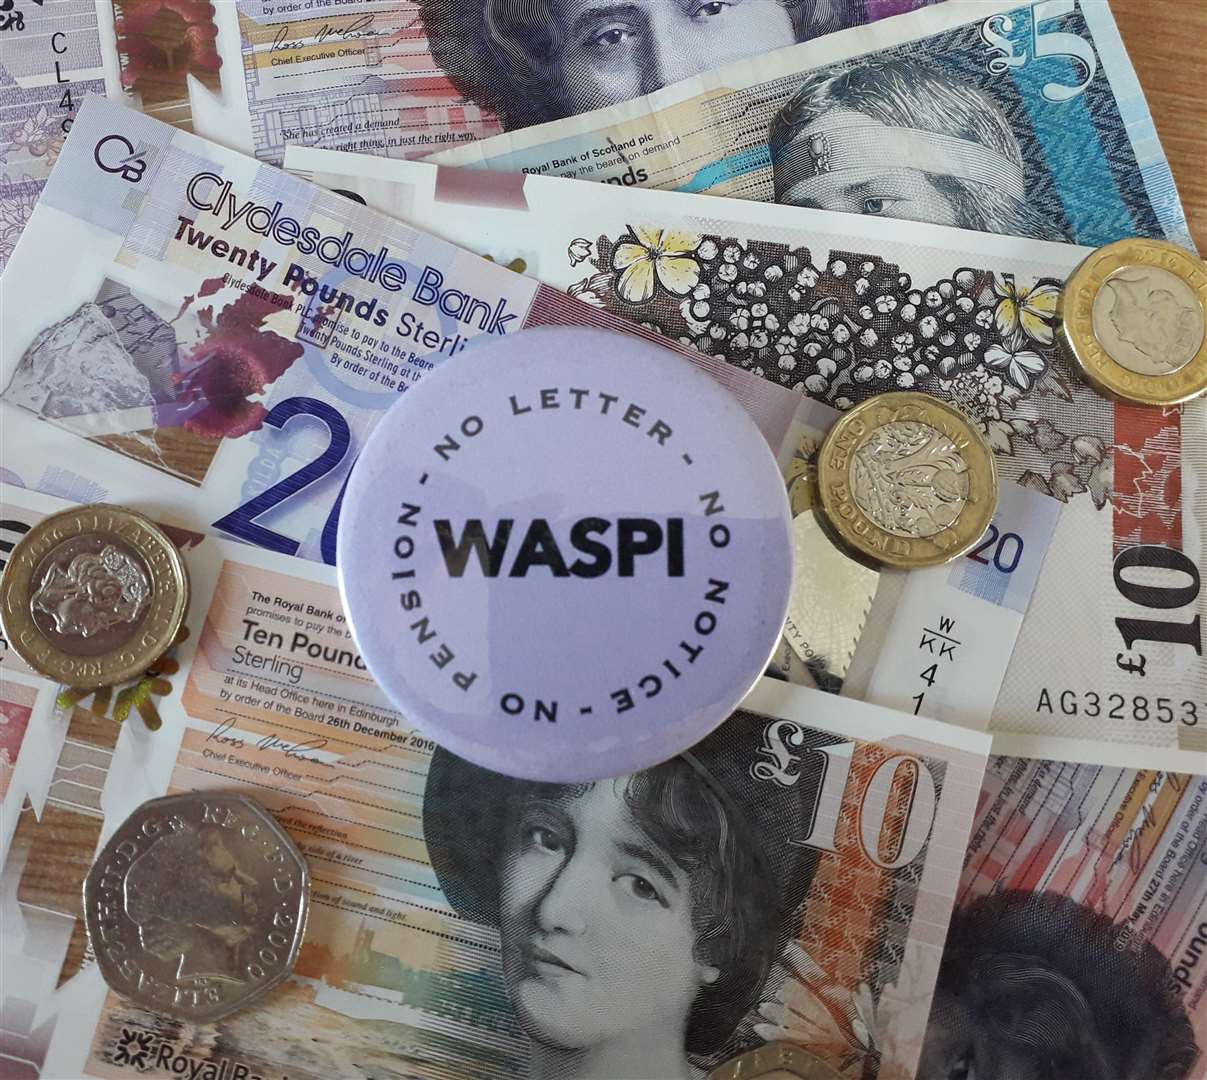 The WASPI campaign has been endorsed by the Ombudsman.